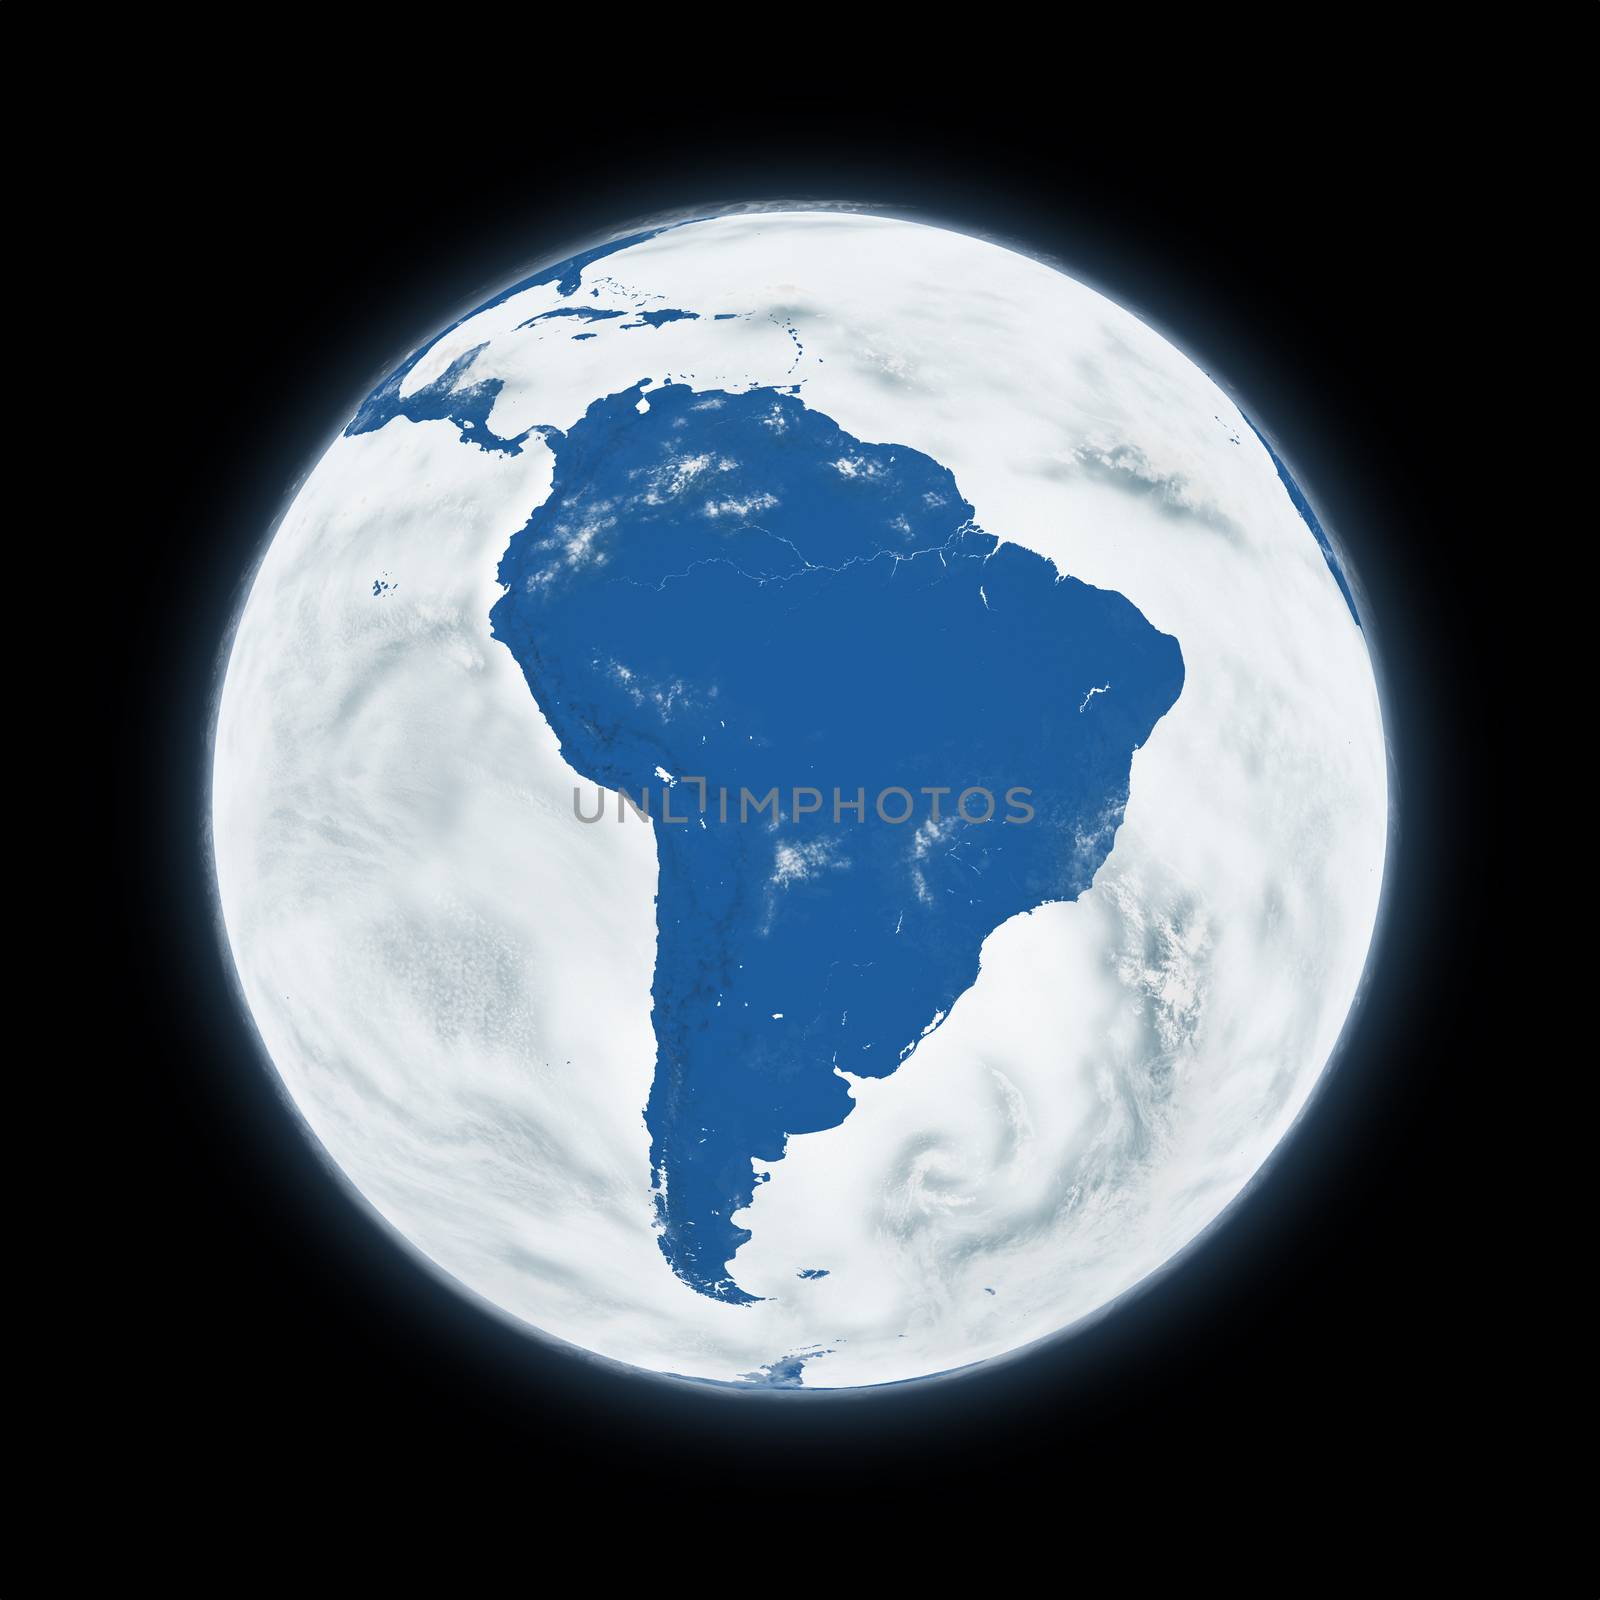 South America on blue planet Earth isolated on black background. Highly detailed planet surface. Elements of this image furnished by NASA.